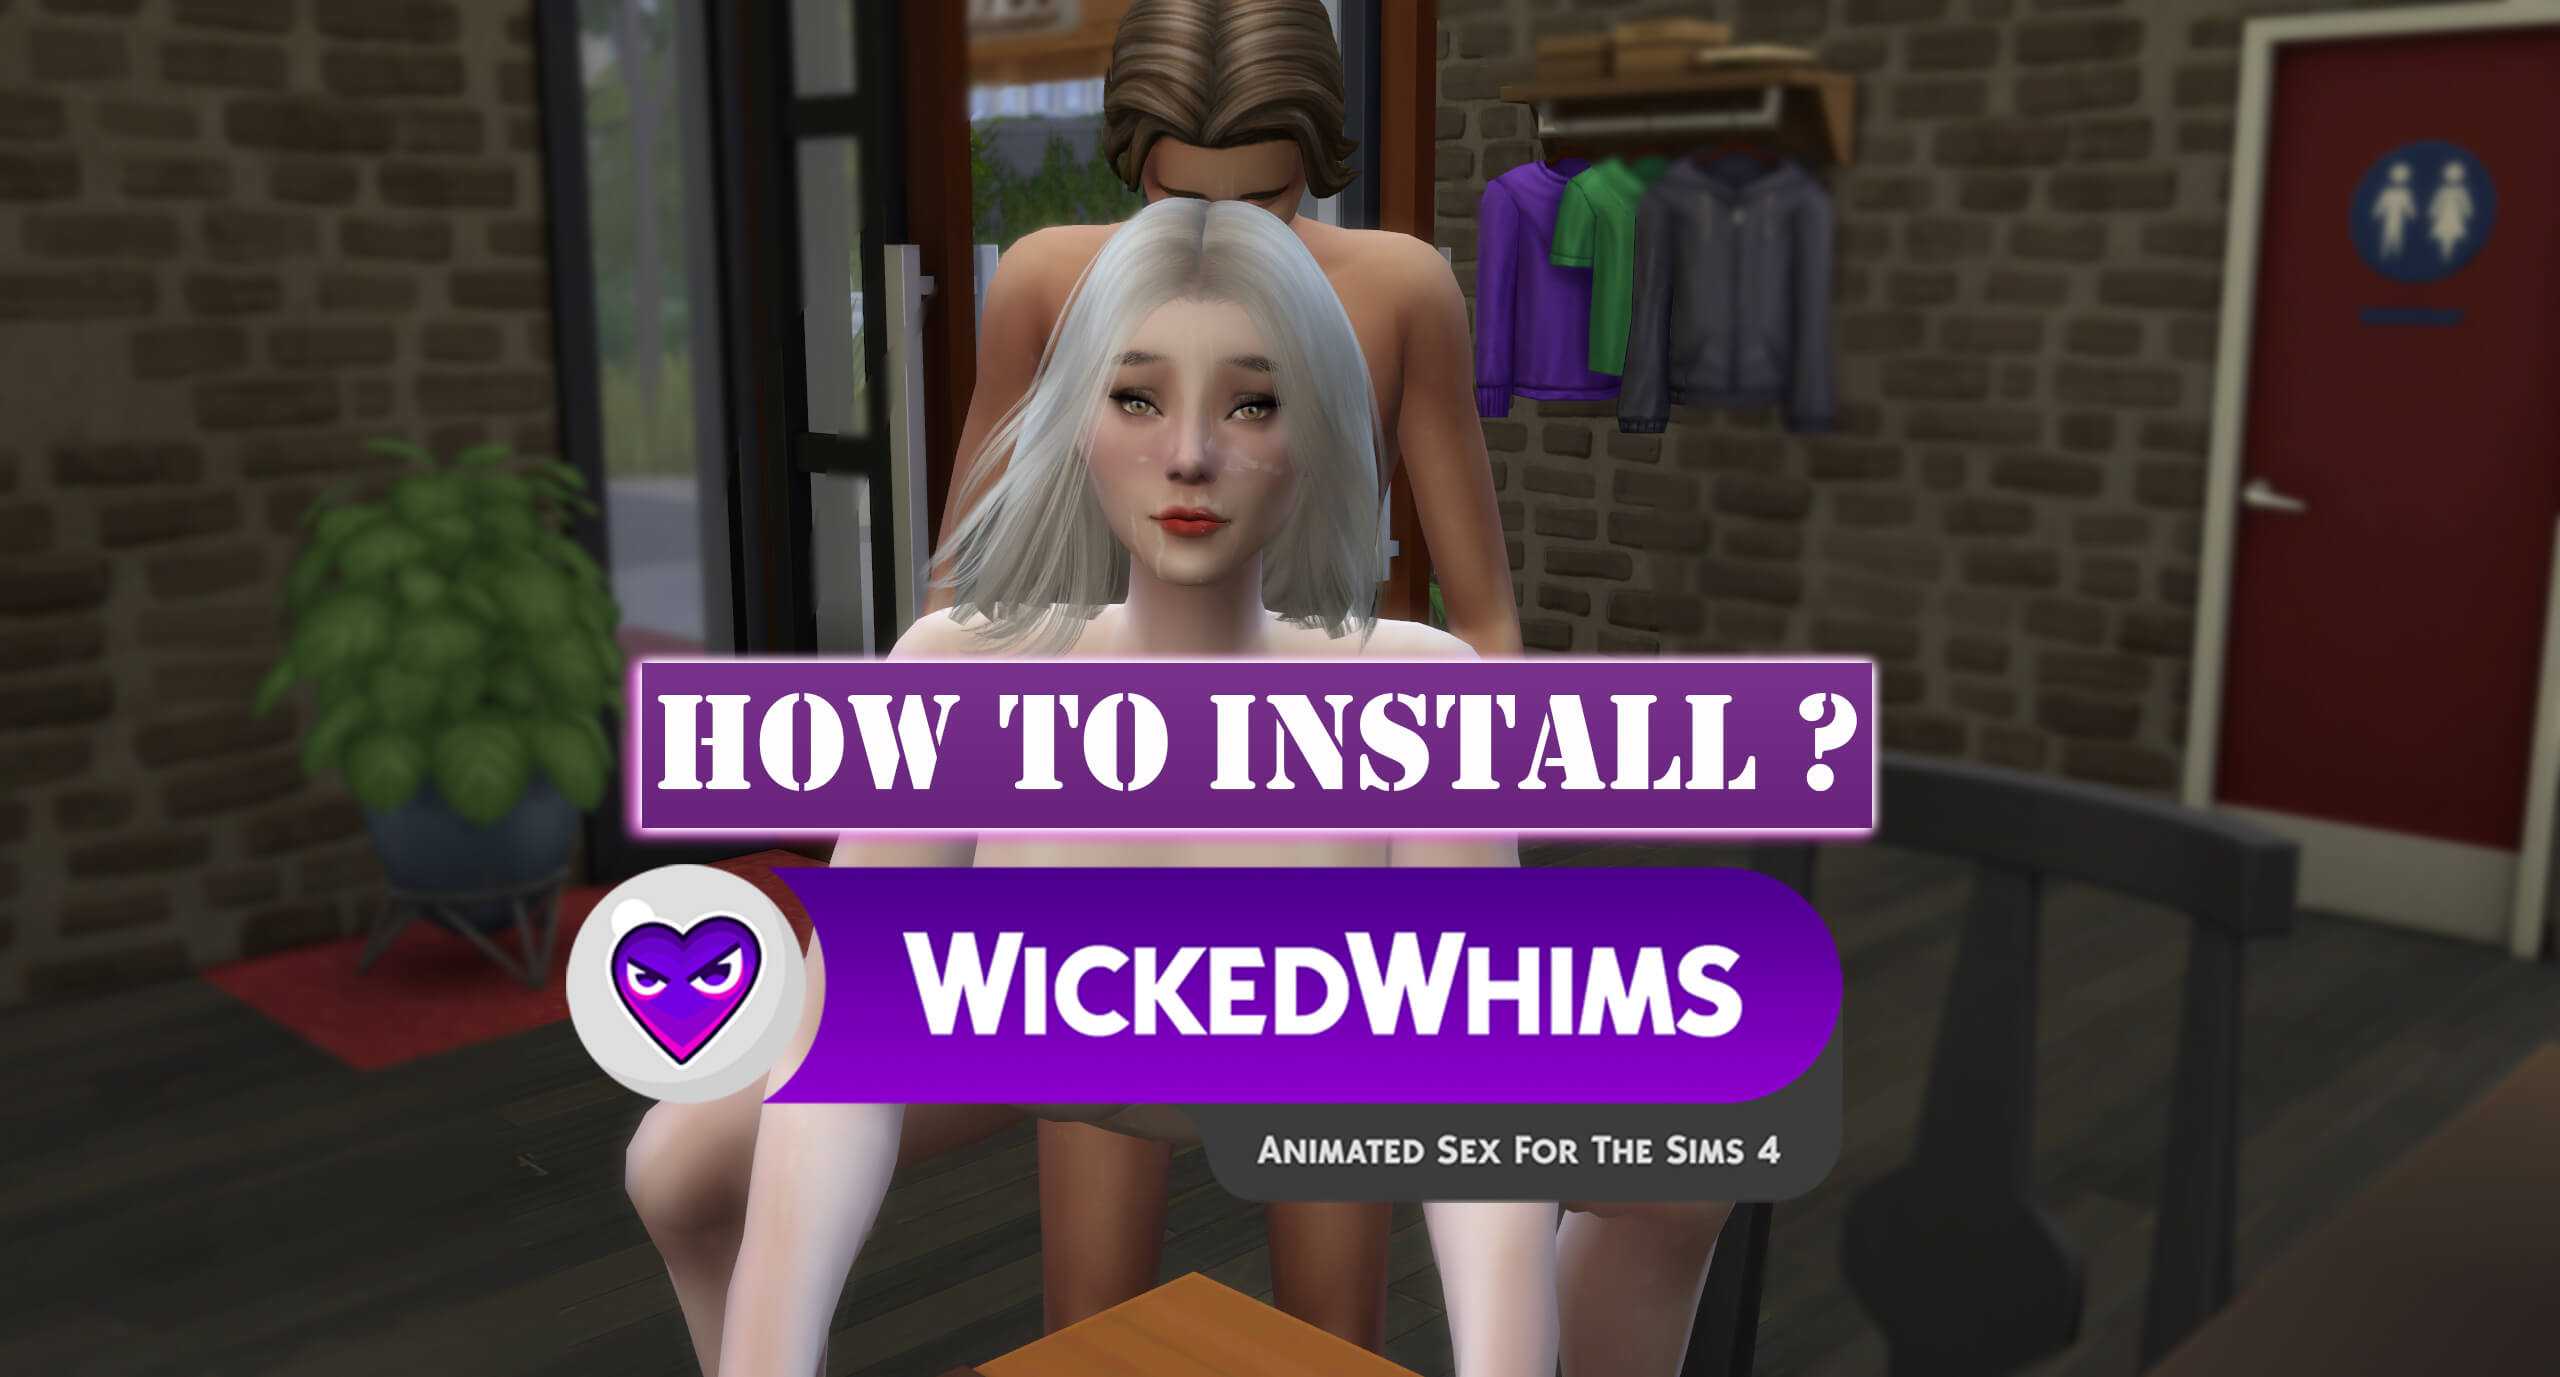 Wickedwhims script. Whims SIMS 4. Фарфоровая кукла Wicked whims. Wicked whims SIMS 4 симс 4. SIMS 4 wickedwhims последняя версия.